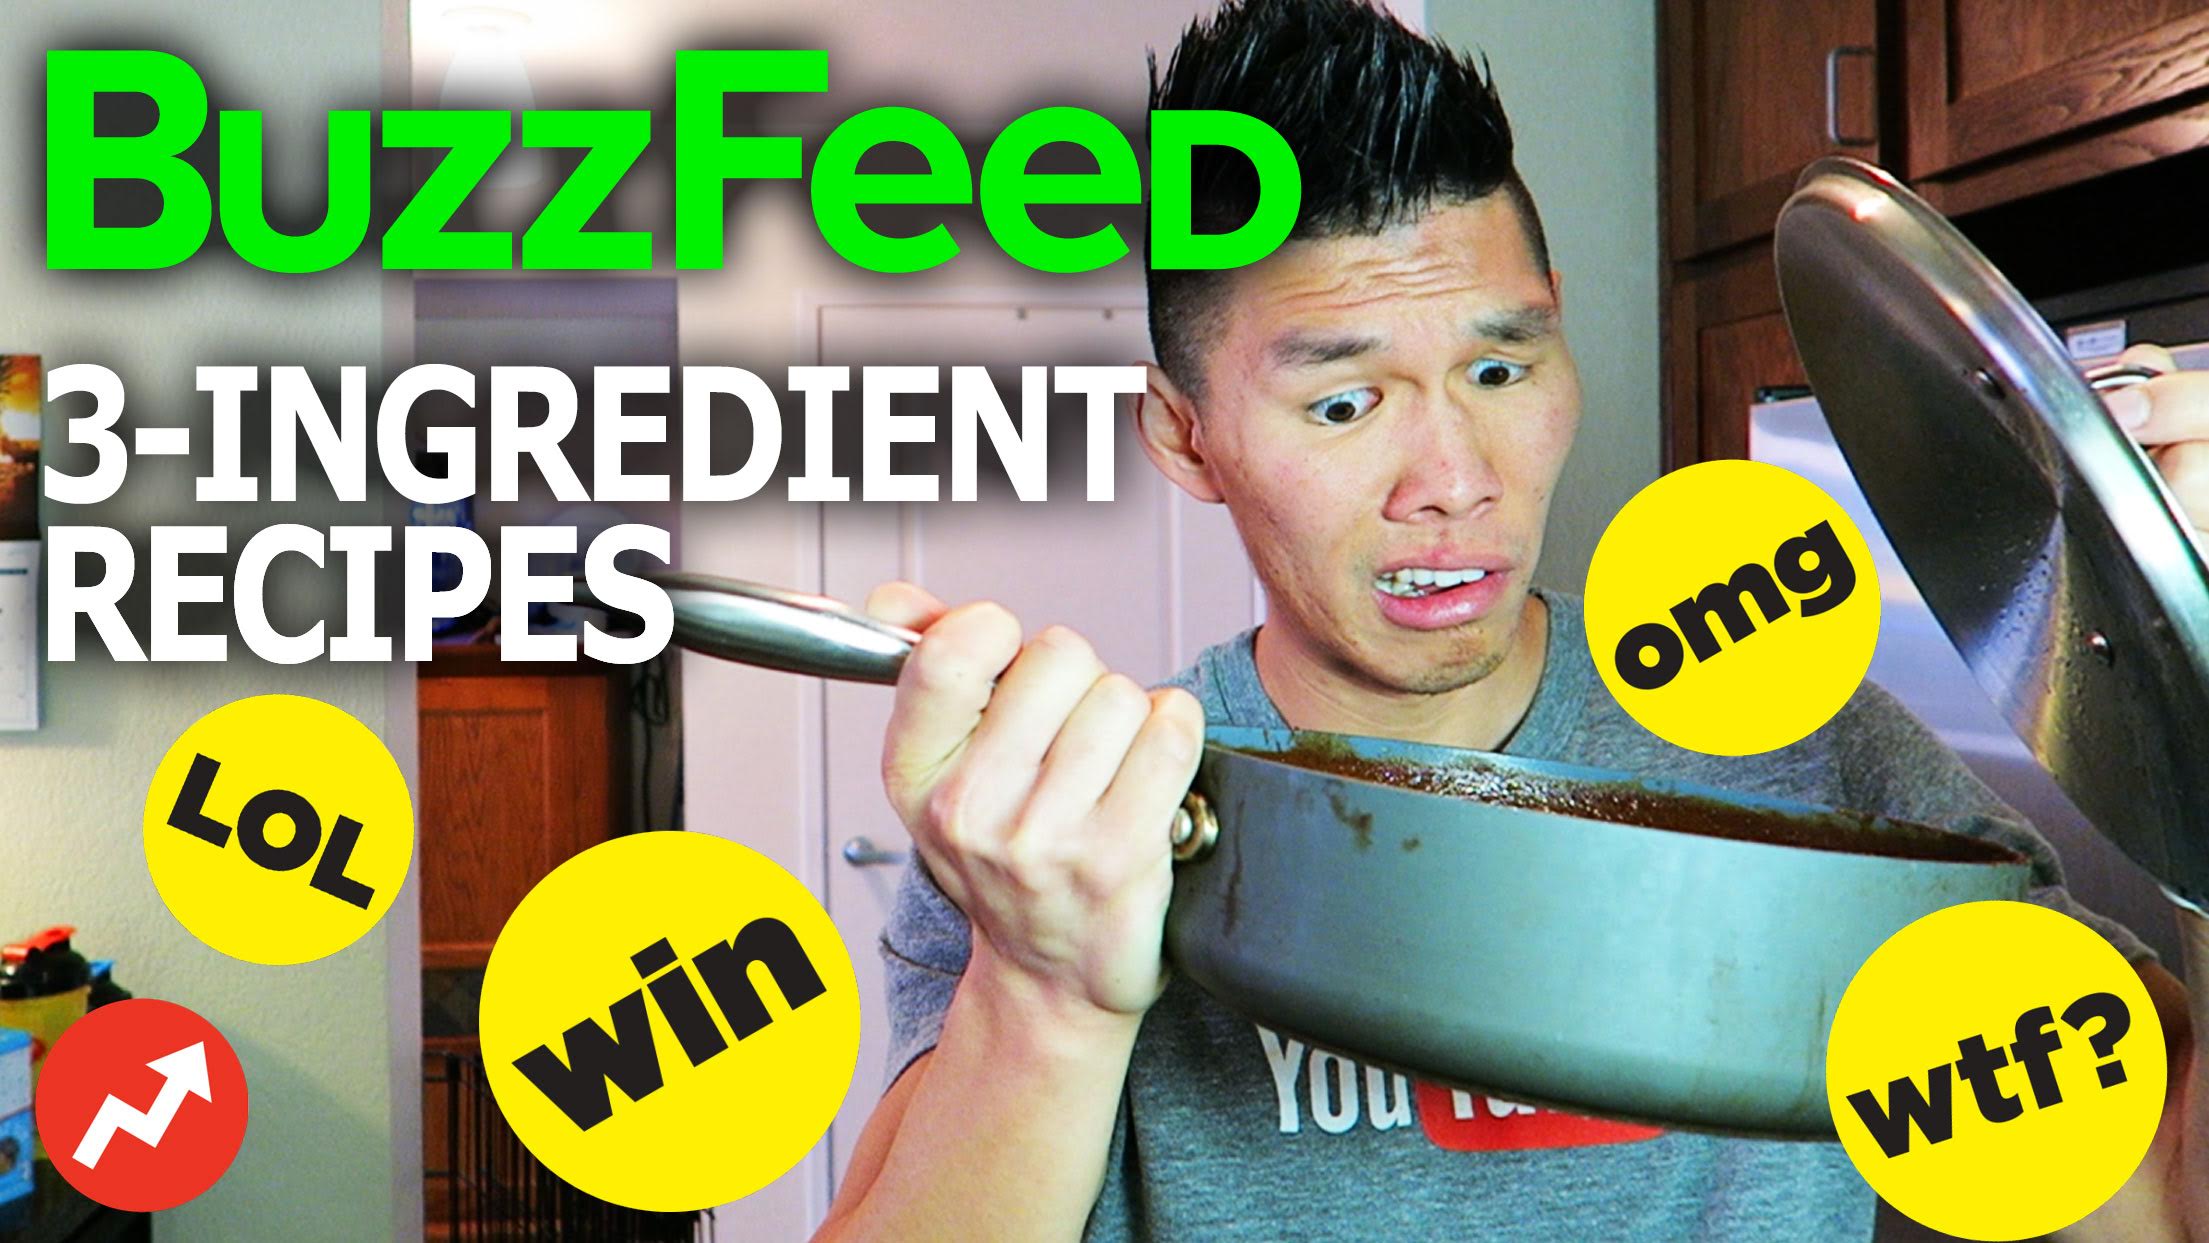 BUZZFEED 3-INGREDIENT FOOD RECIPES TESTED